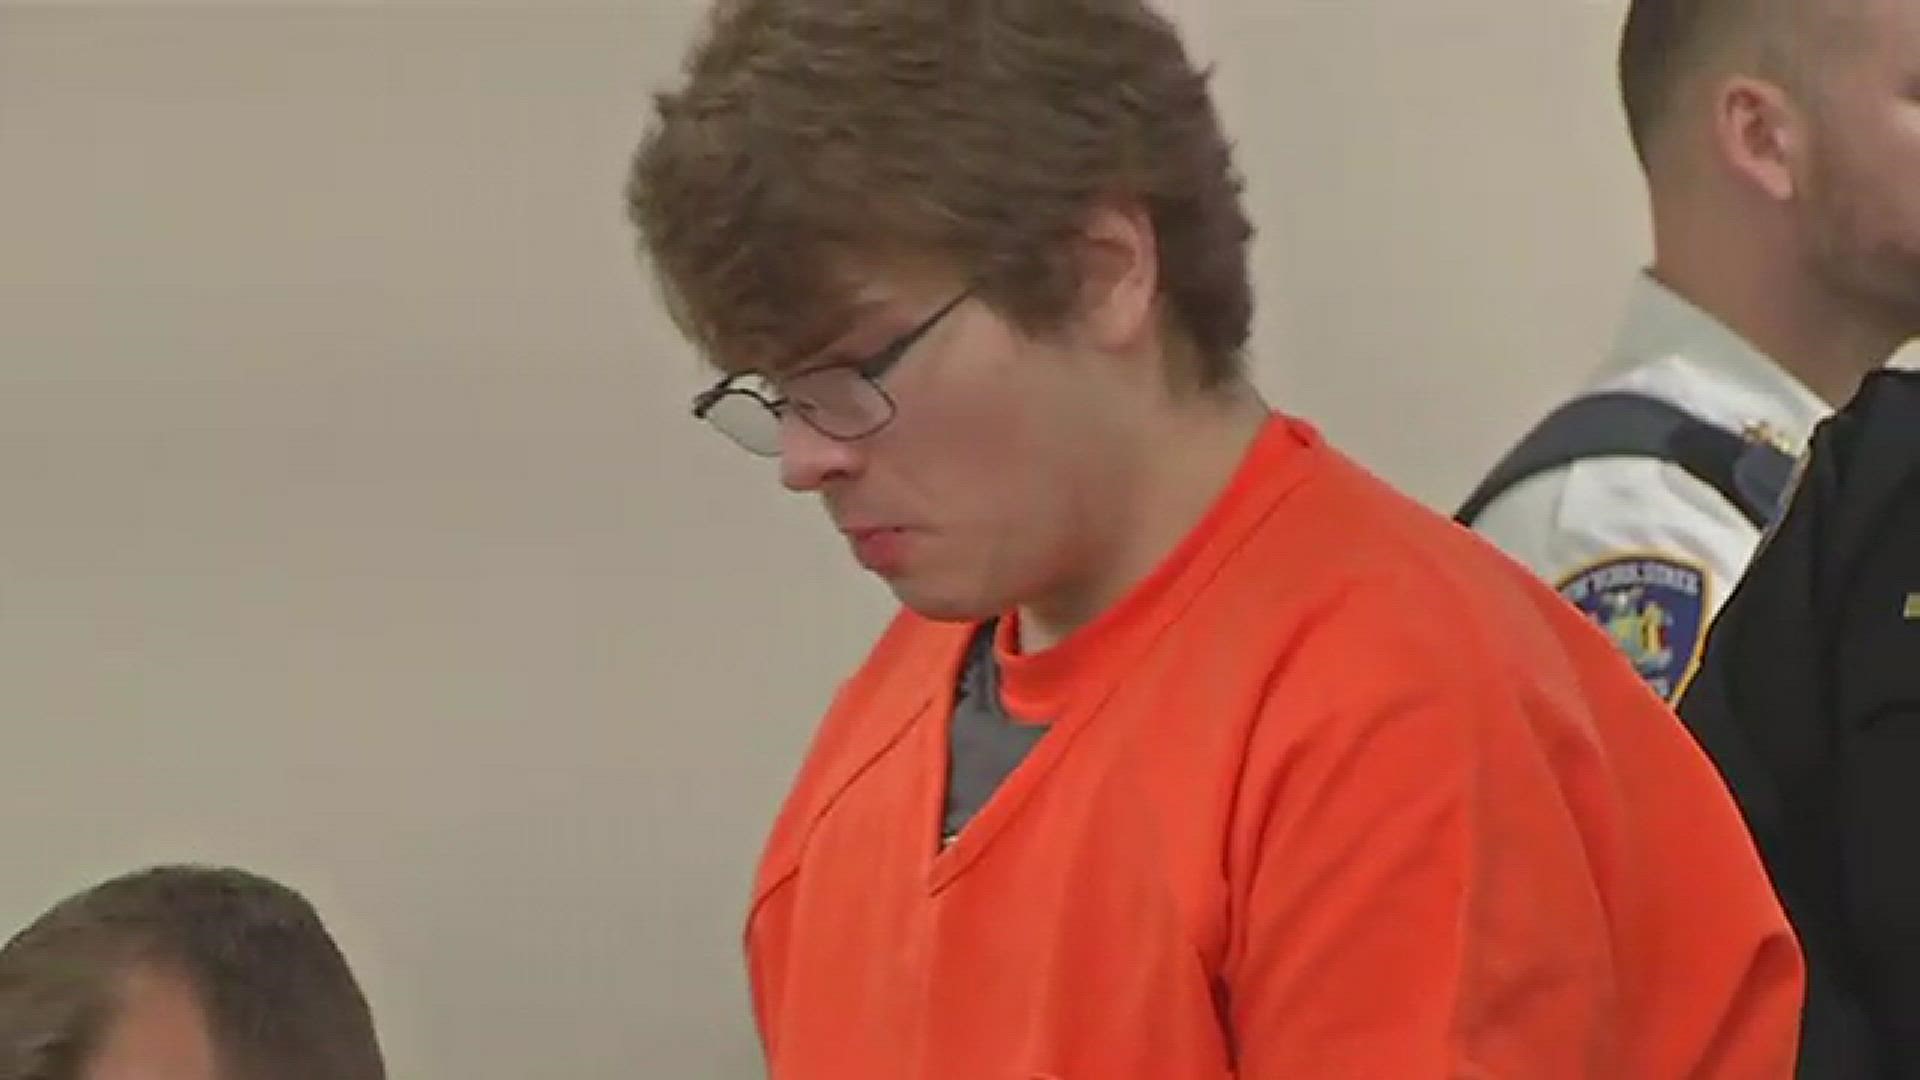 Payton Gendron, who killed 10 Black people and injured 3 others in a mass shooting speaks in court before sentencing.